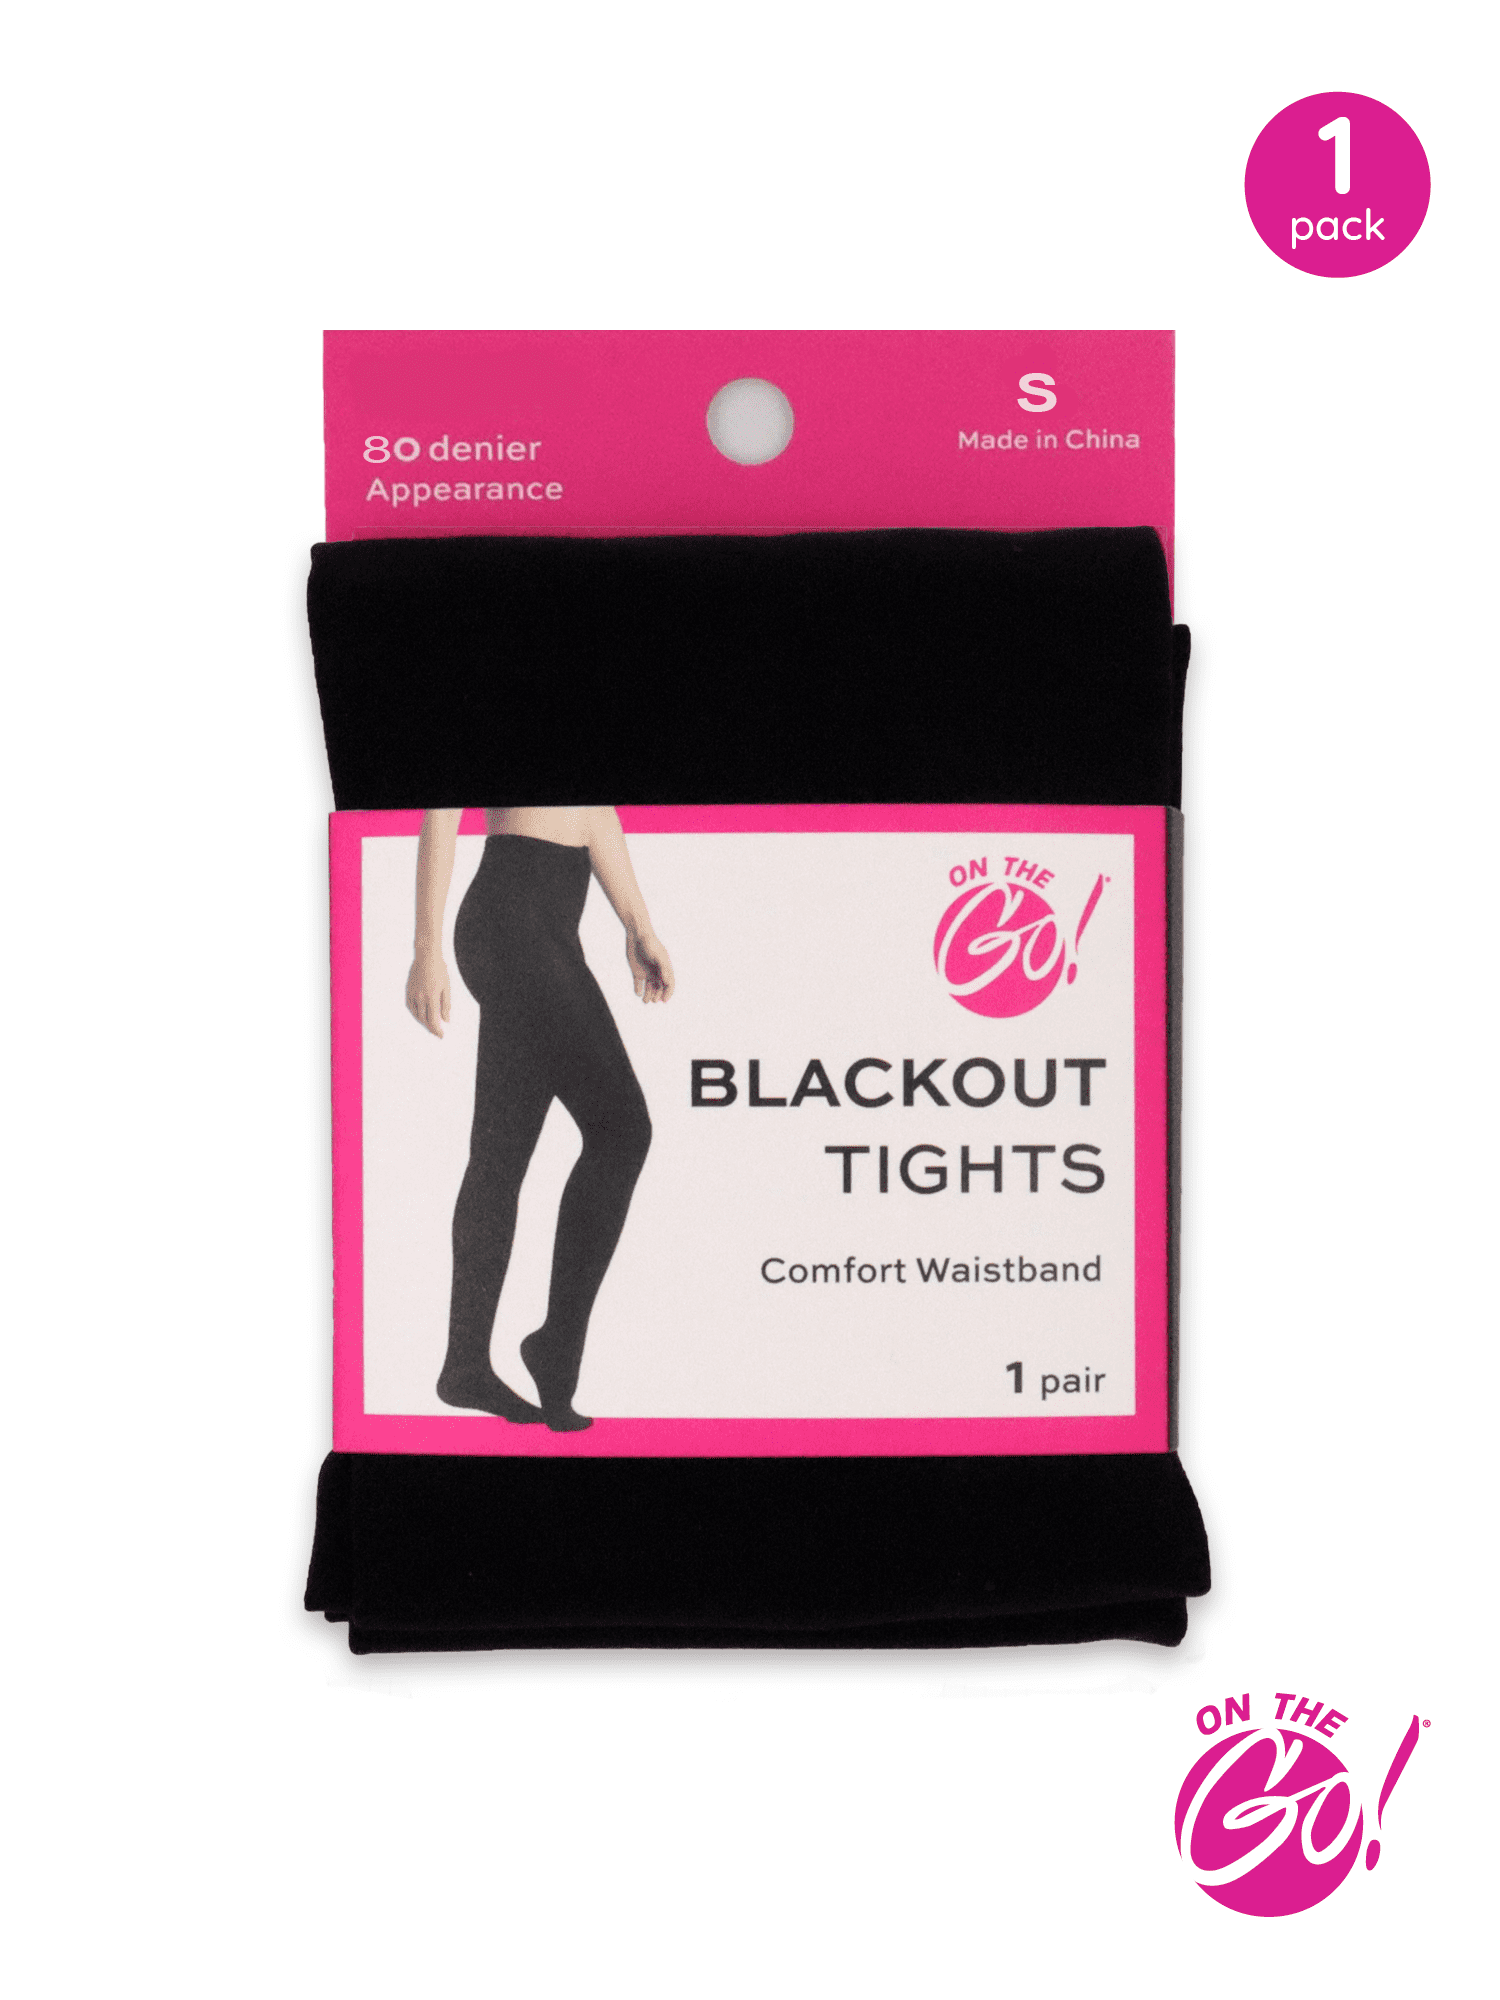 Blackout Tights